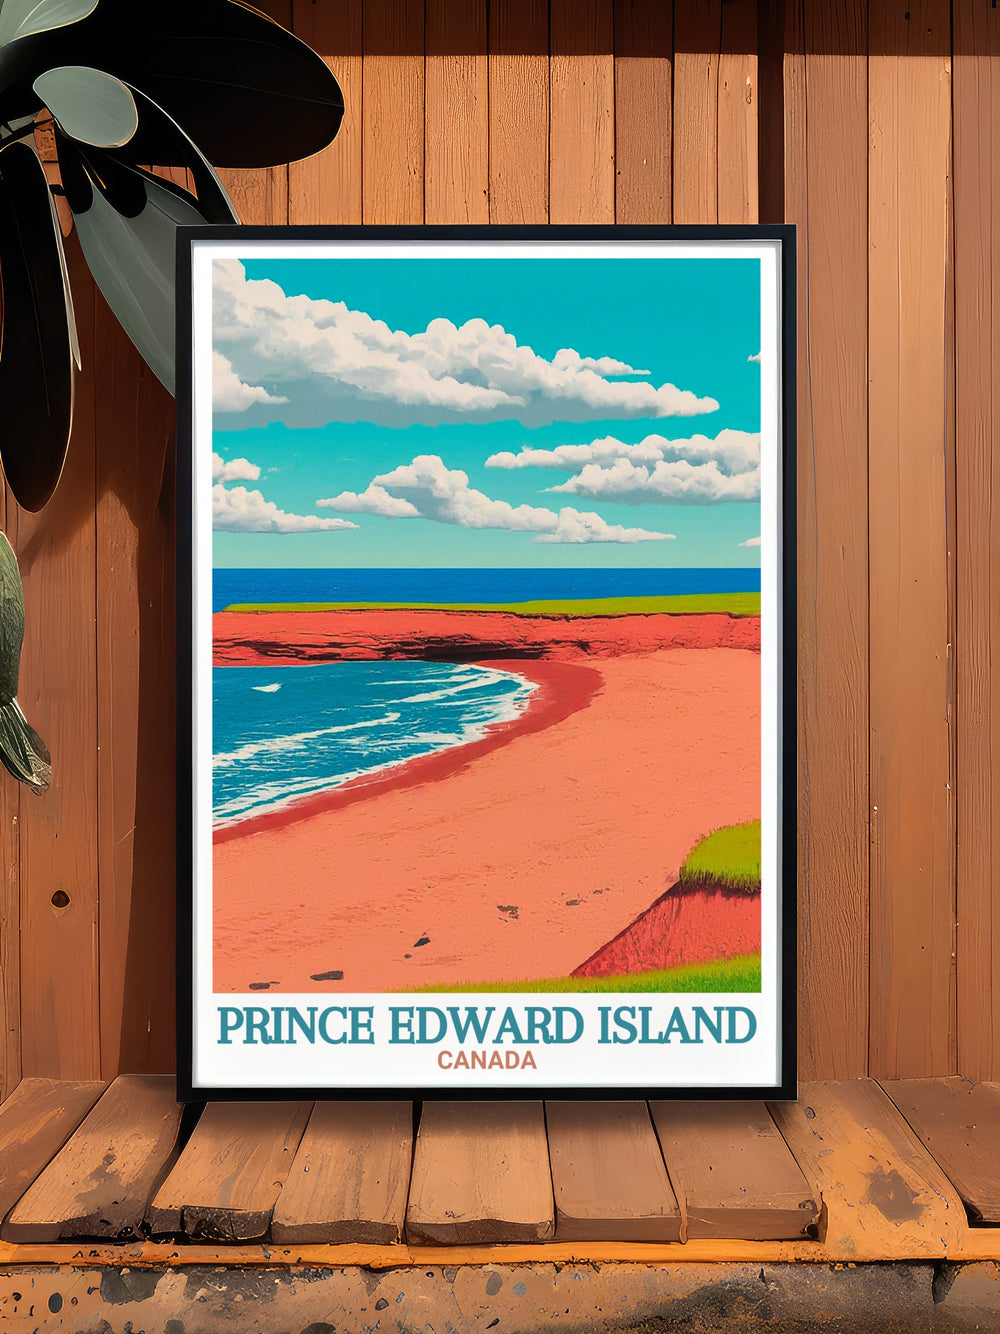 Prince Edward Islands iconic Cavendish Beach lighthouse standing tall against a stunning sunset landscape making it an ideal addition to your home decor or as a thoughtful birthday gift highlighting the natural beauty of this beloved destination.